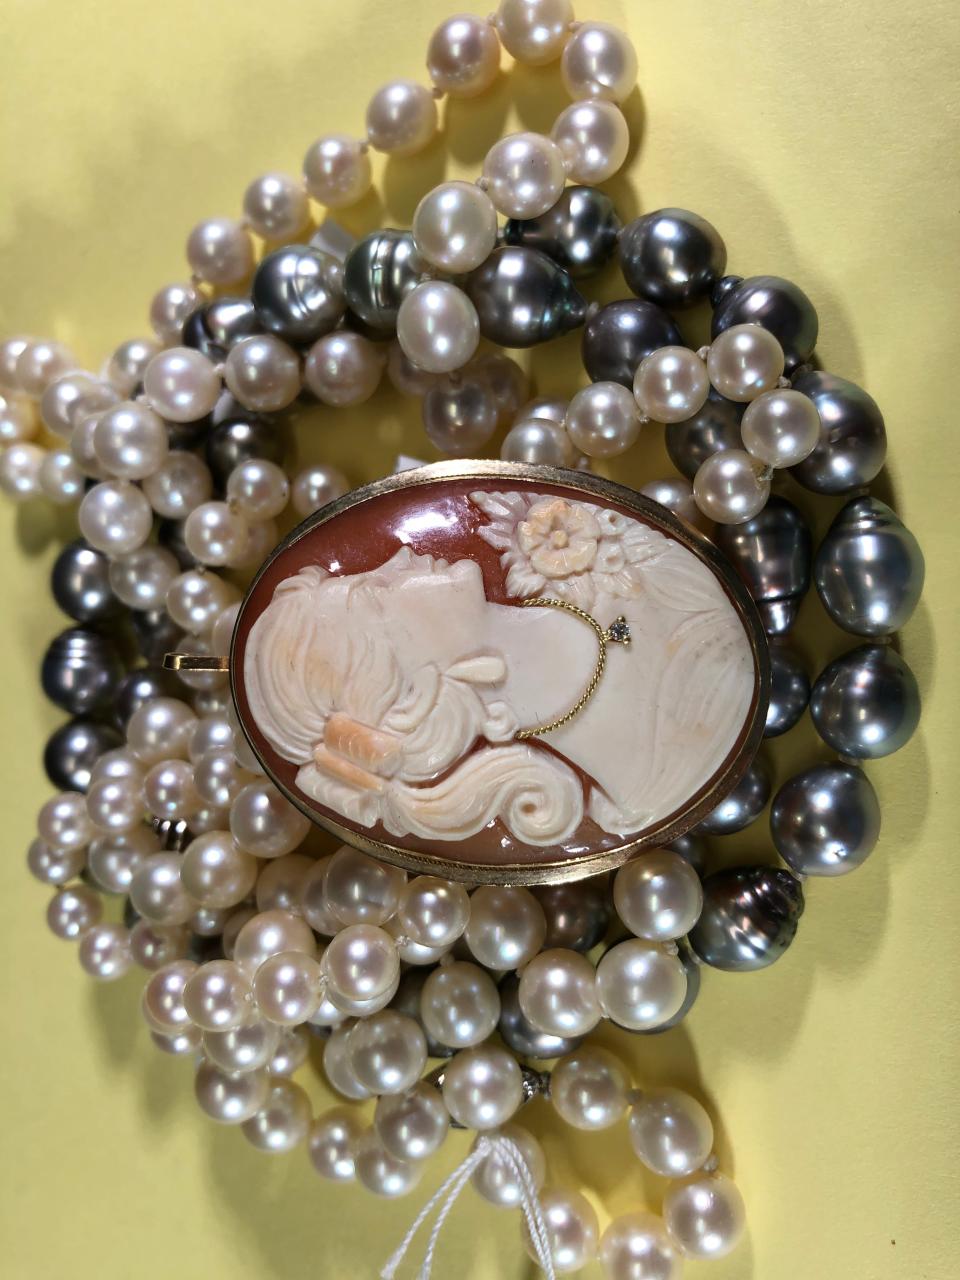 Sales of pearls and cameos are on the rise.